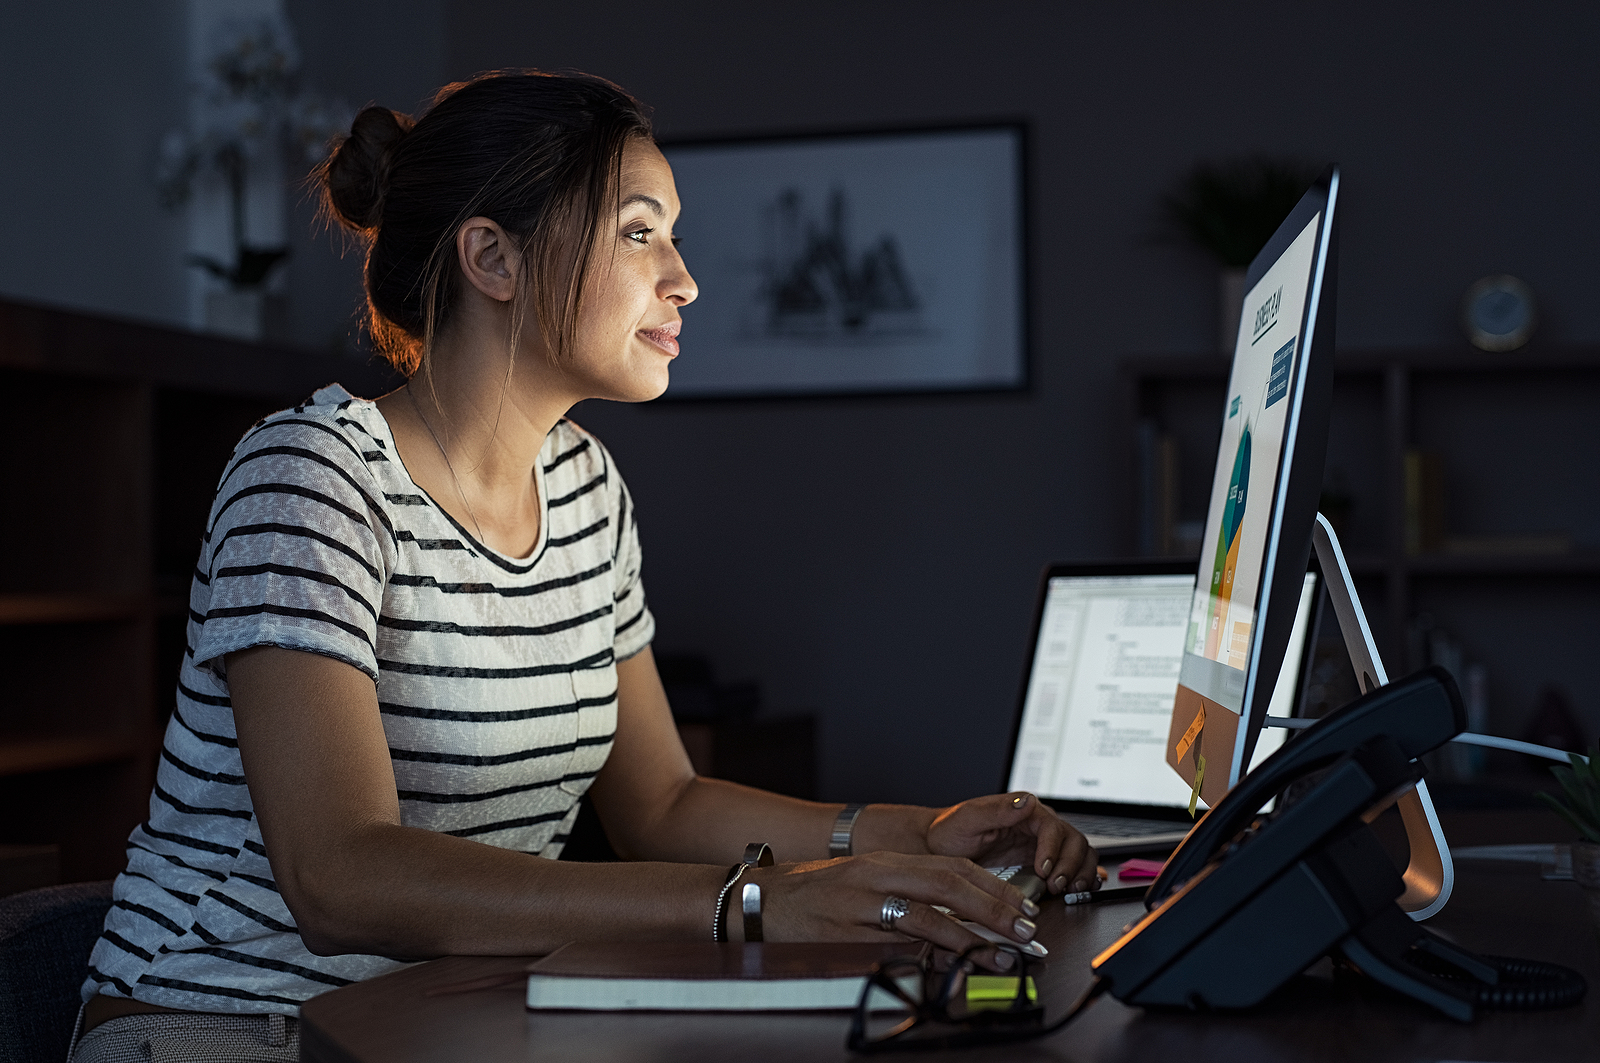 Young businesswoman in casual clothing working on desktop computer learning how to negotiate collections on your credit report. Beautiful tired business woman working on assignment at night. Girl using computer late at night in office.